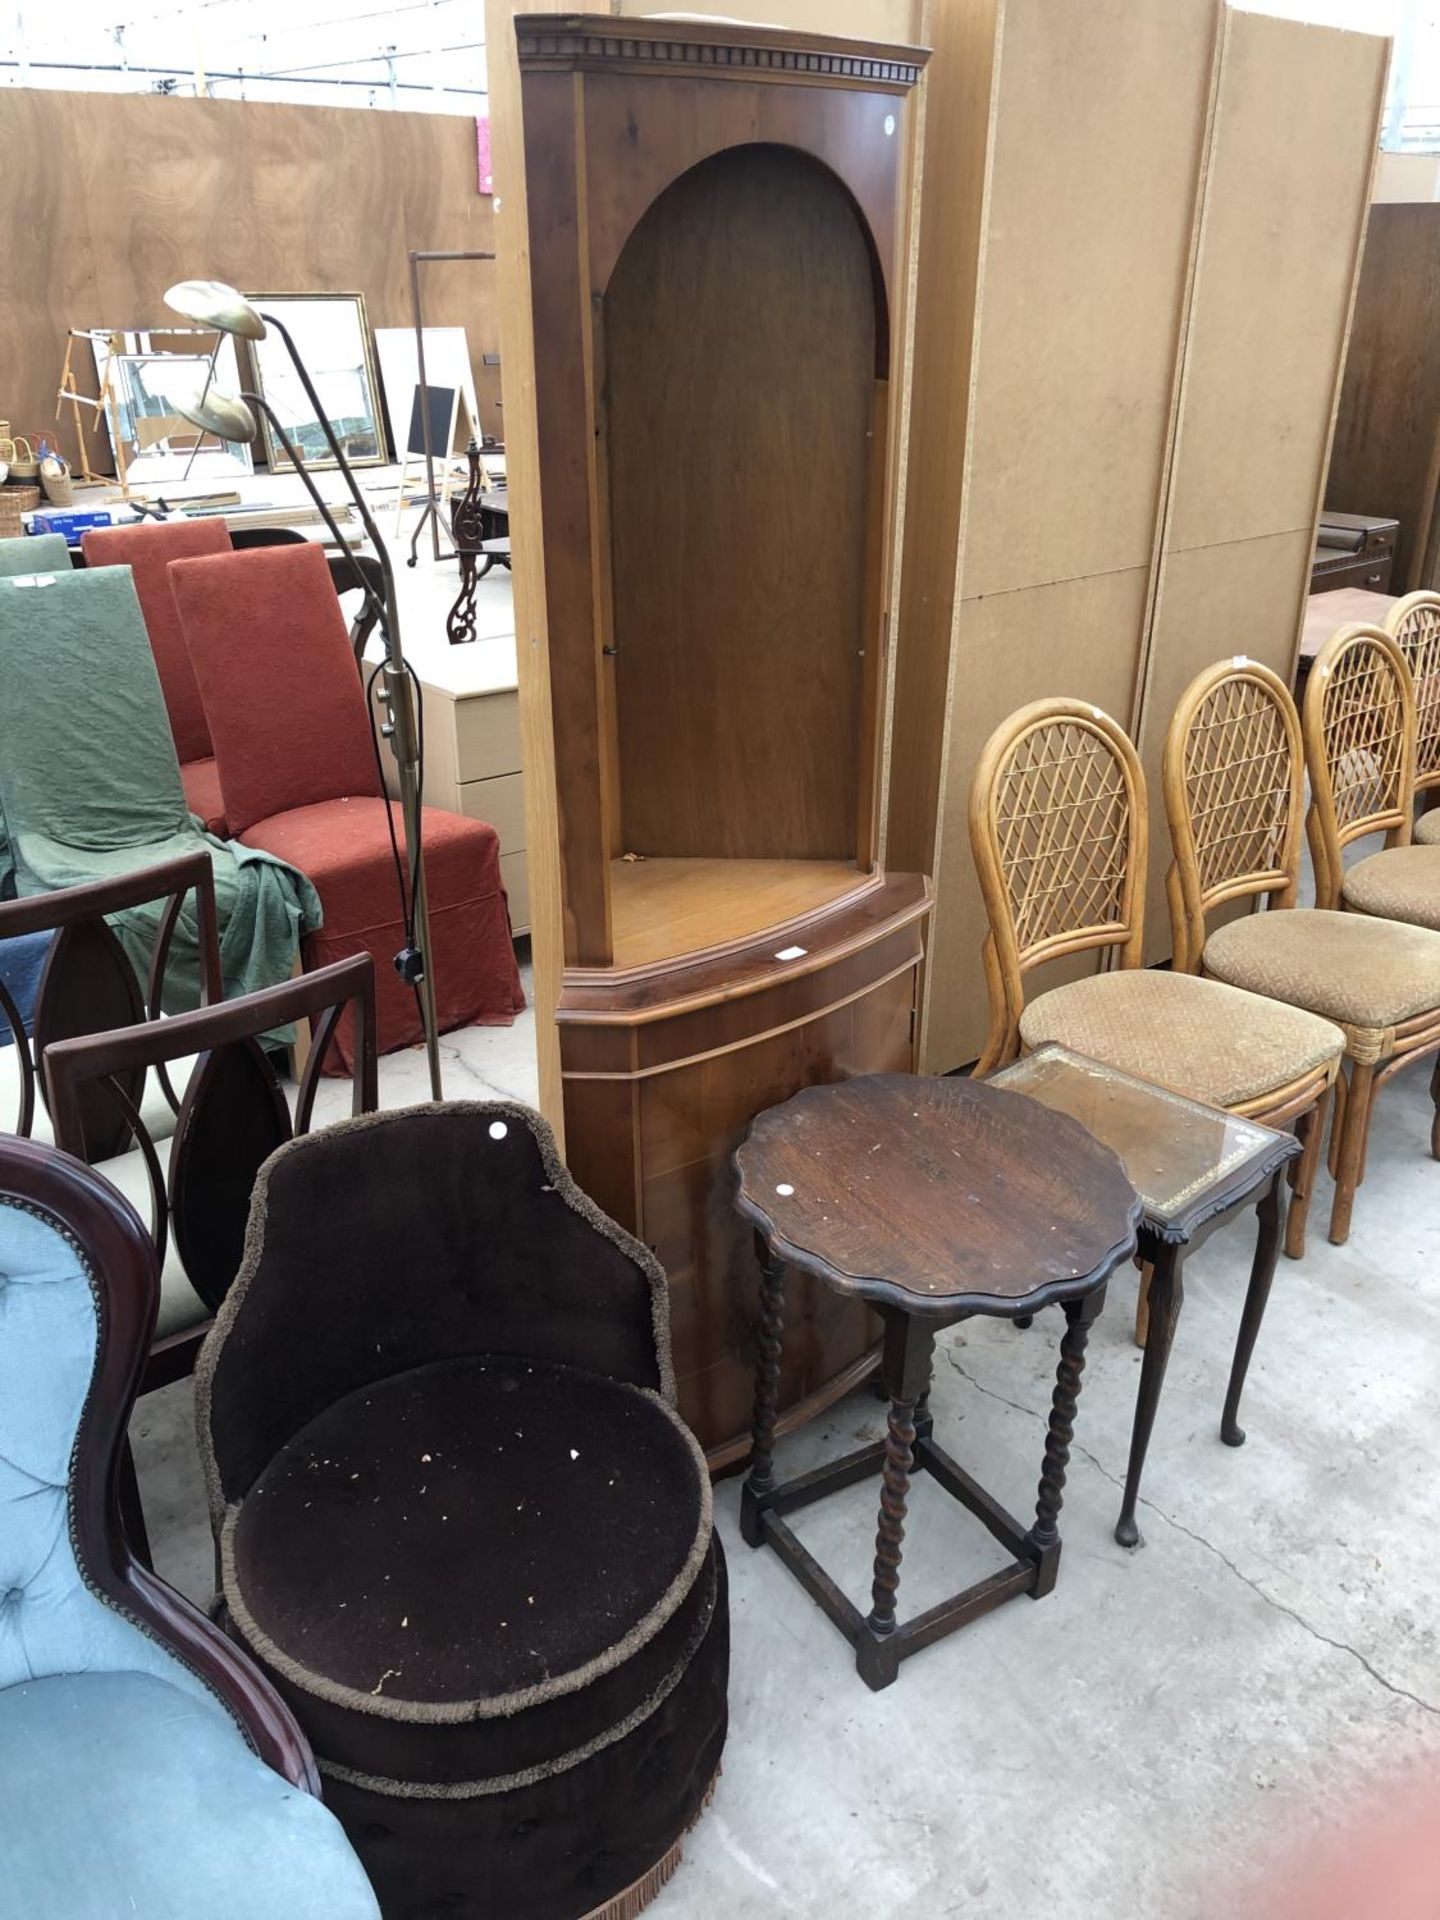 FOUR ITEMS - BEDROOM CHAIR, YEW WOOD CABINET AND TWO TABLES